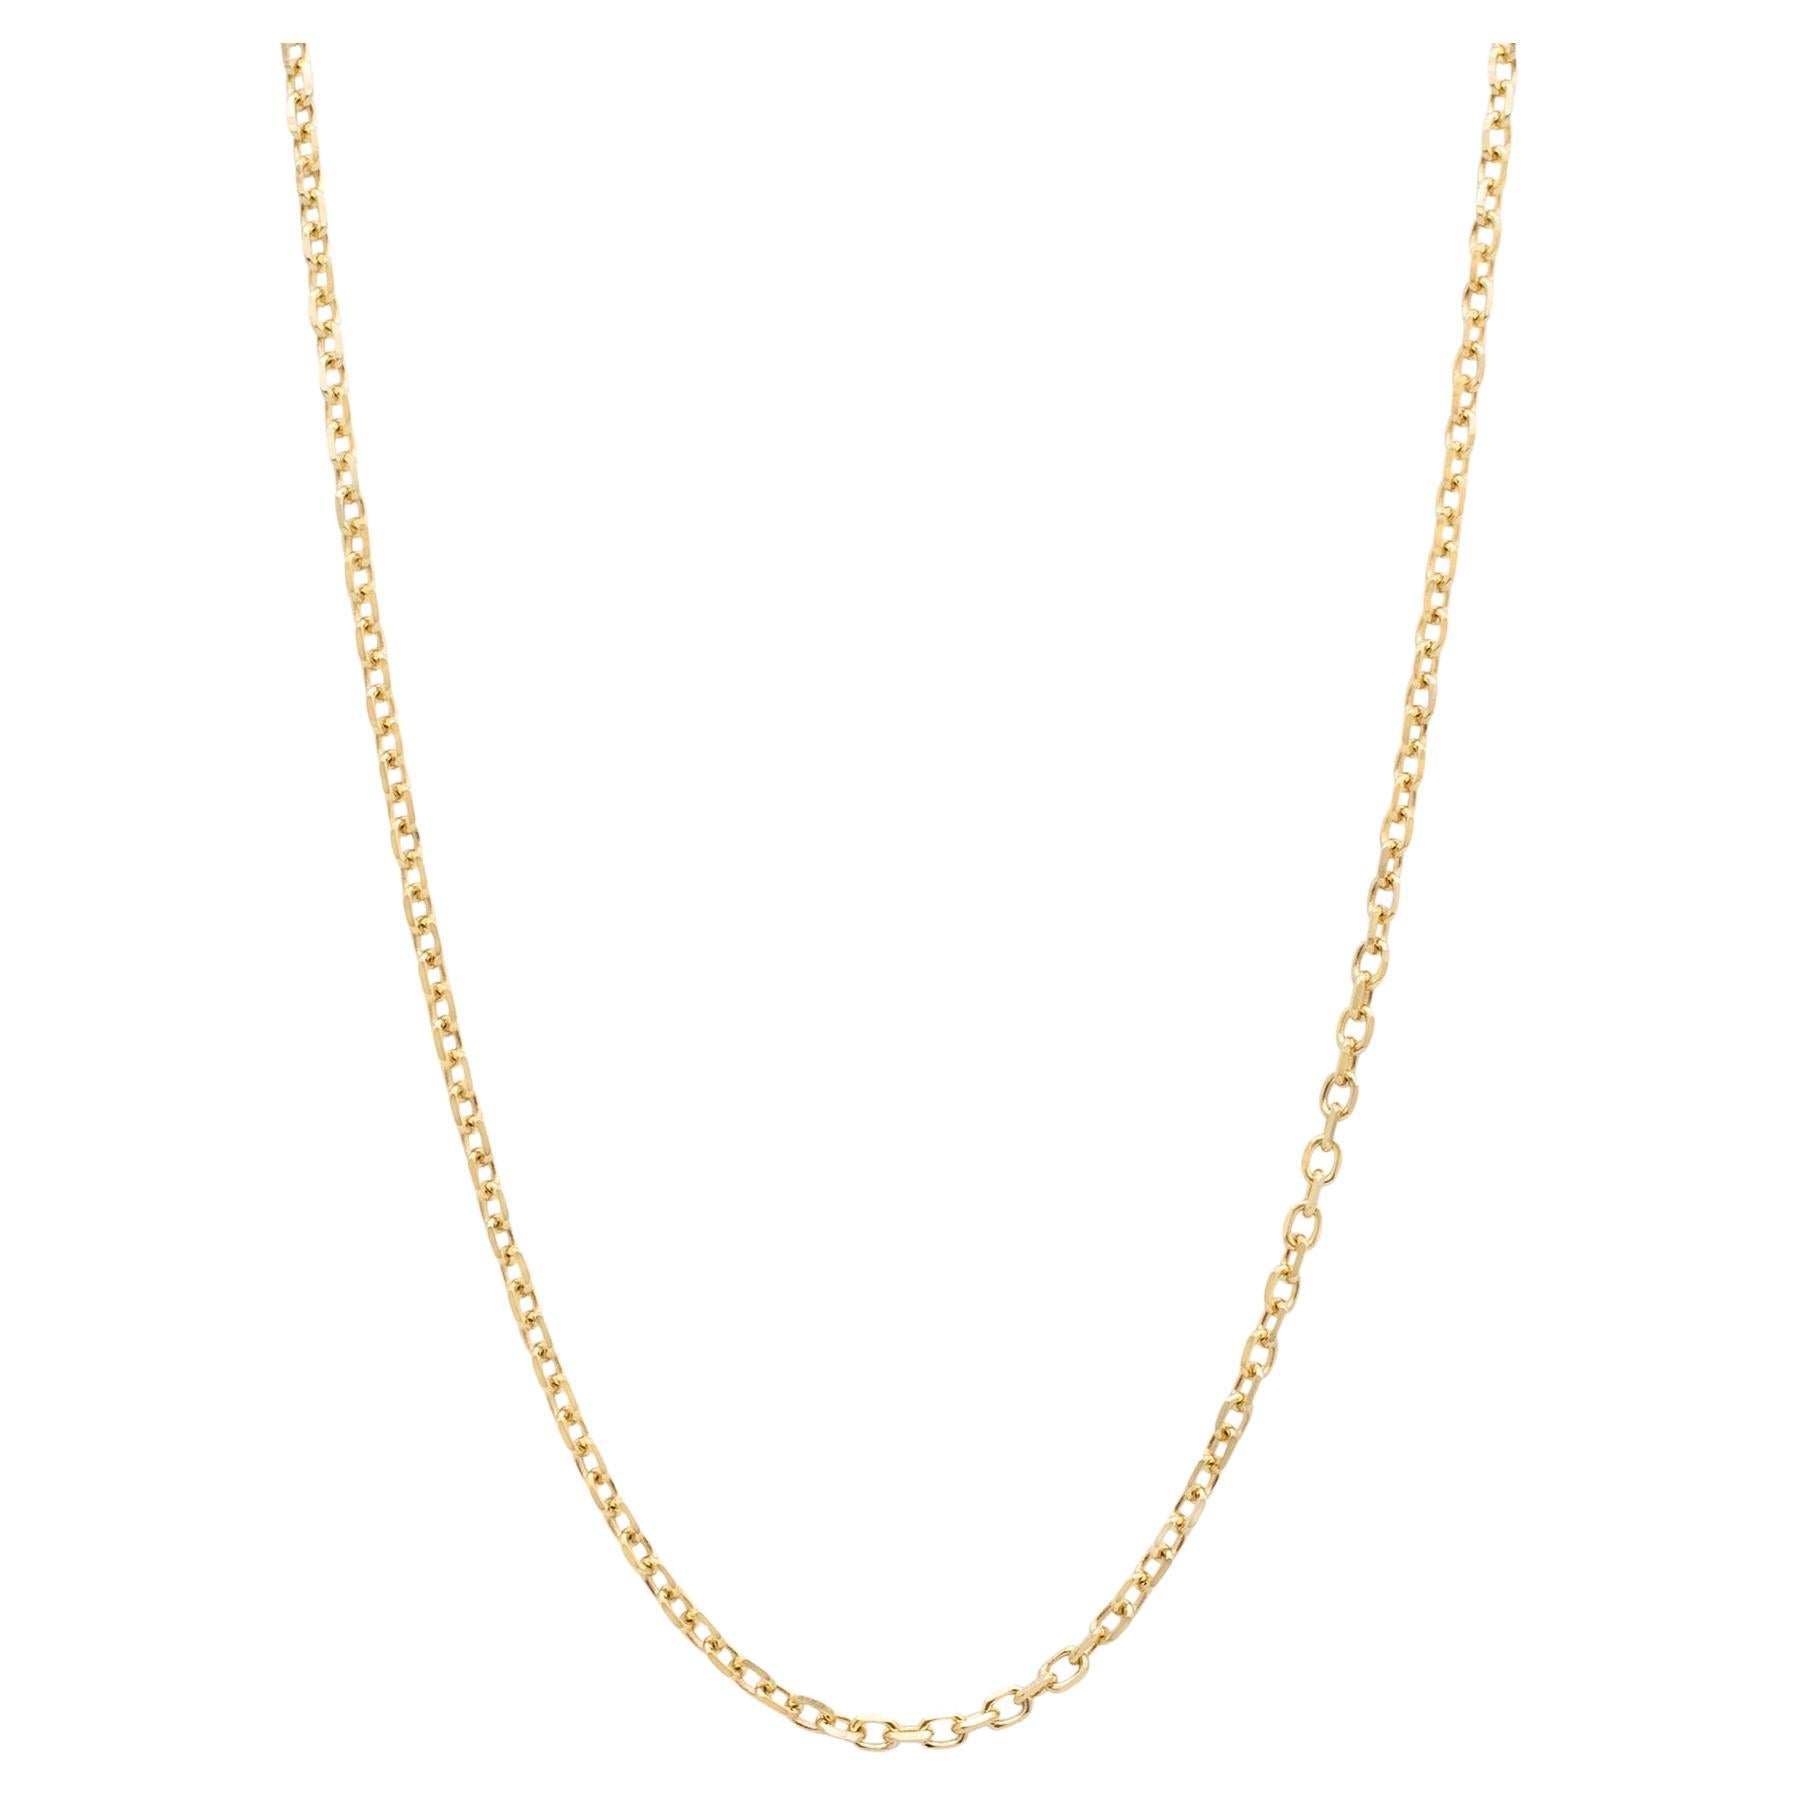 Ladies 14K Yellow Gold Rolo Chain Cable Necklace